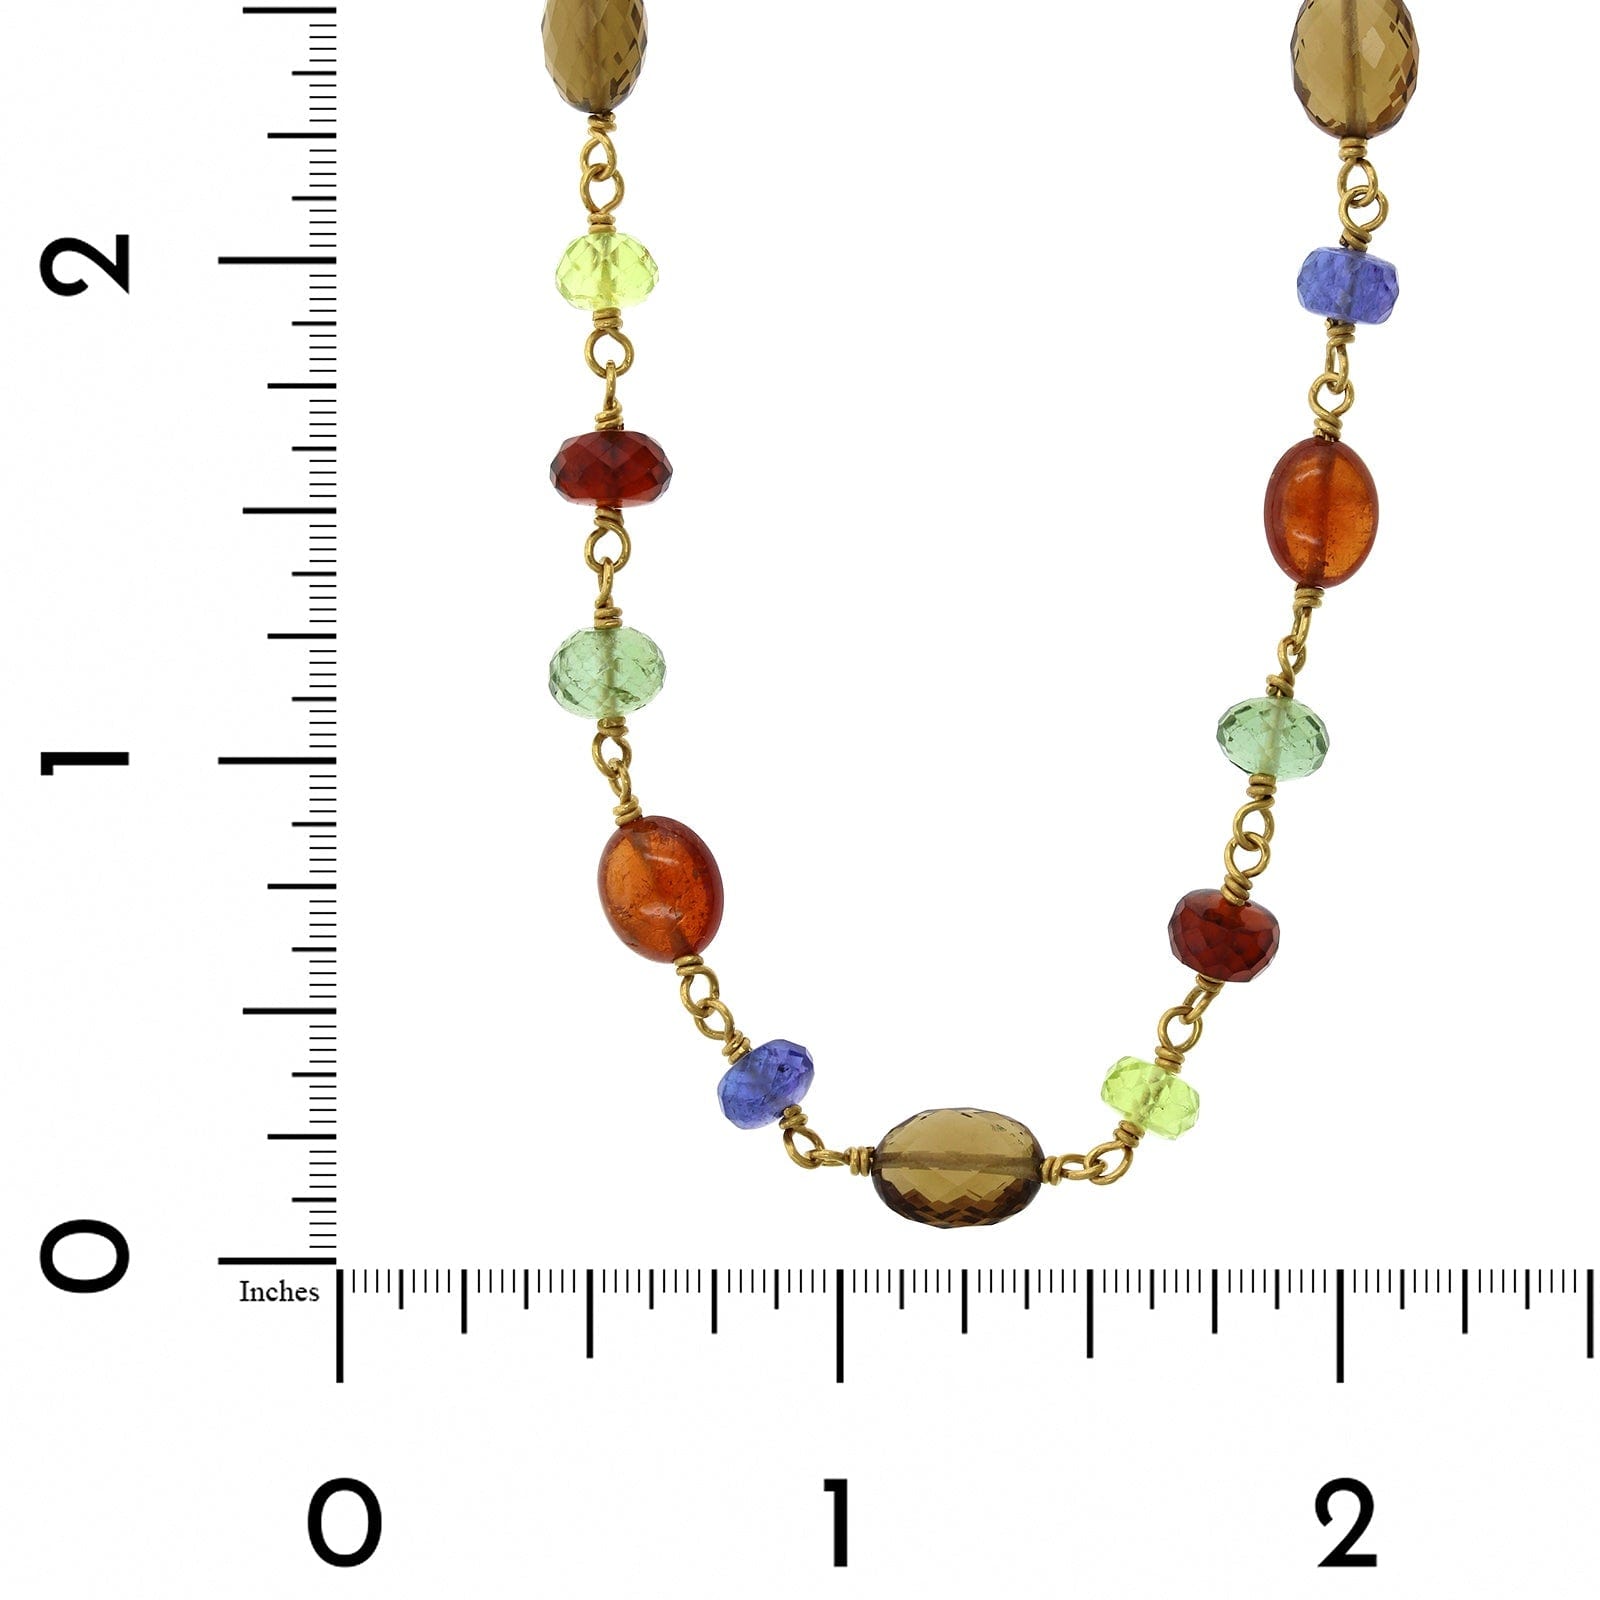 22K Yellow Gold Multi Gem Bead Necklace, 22k yellow gold Long's Jewelers